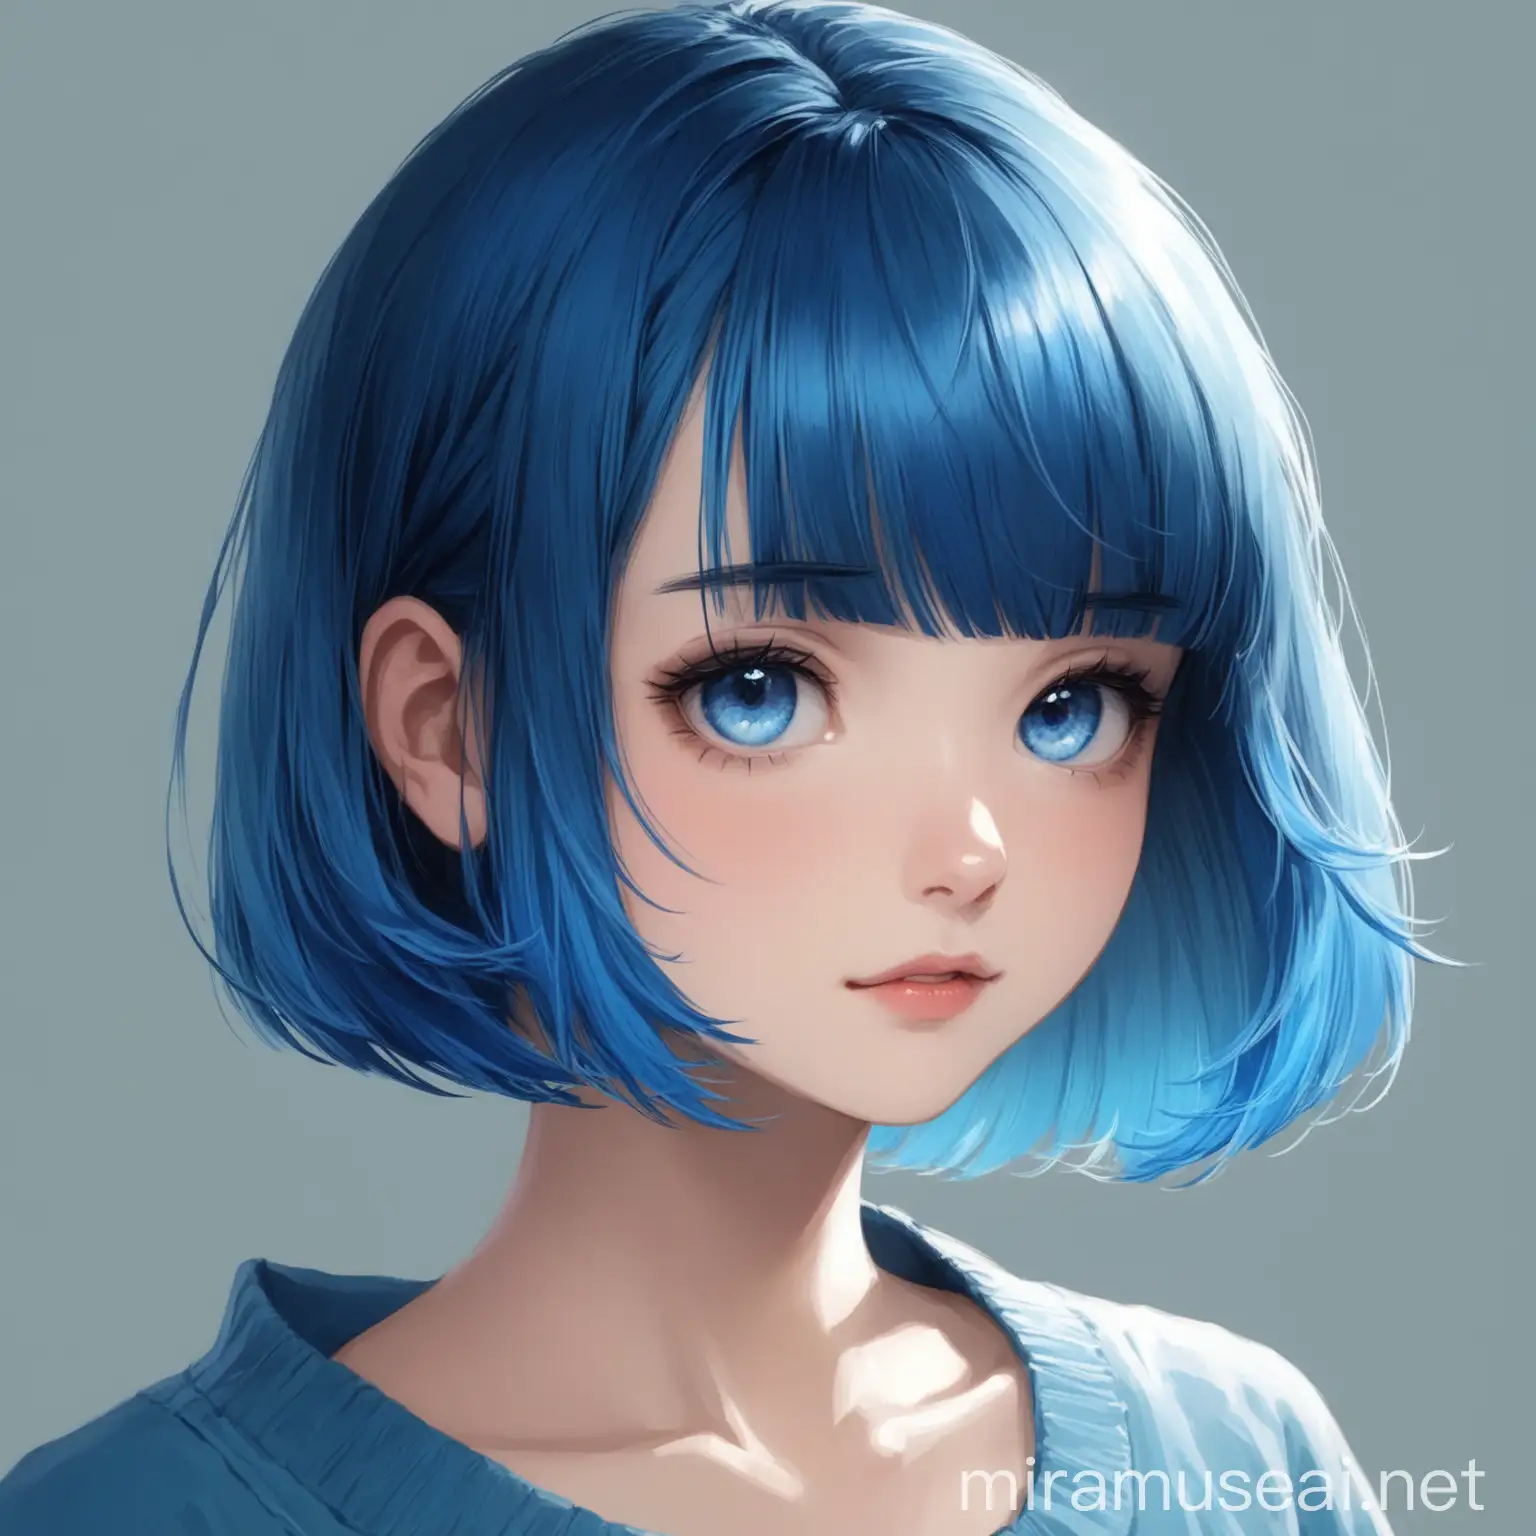 A pretty girl with short blue hair and bangs